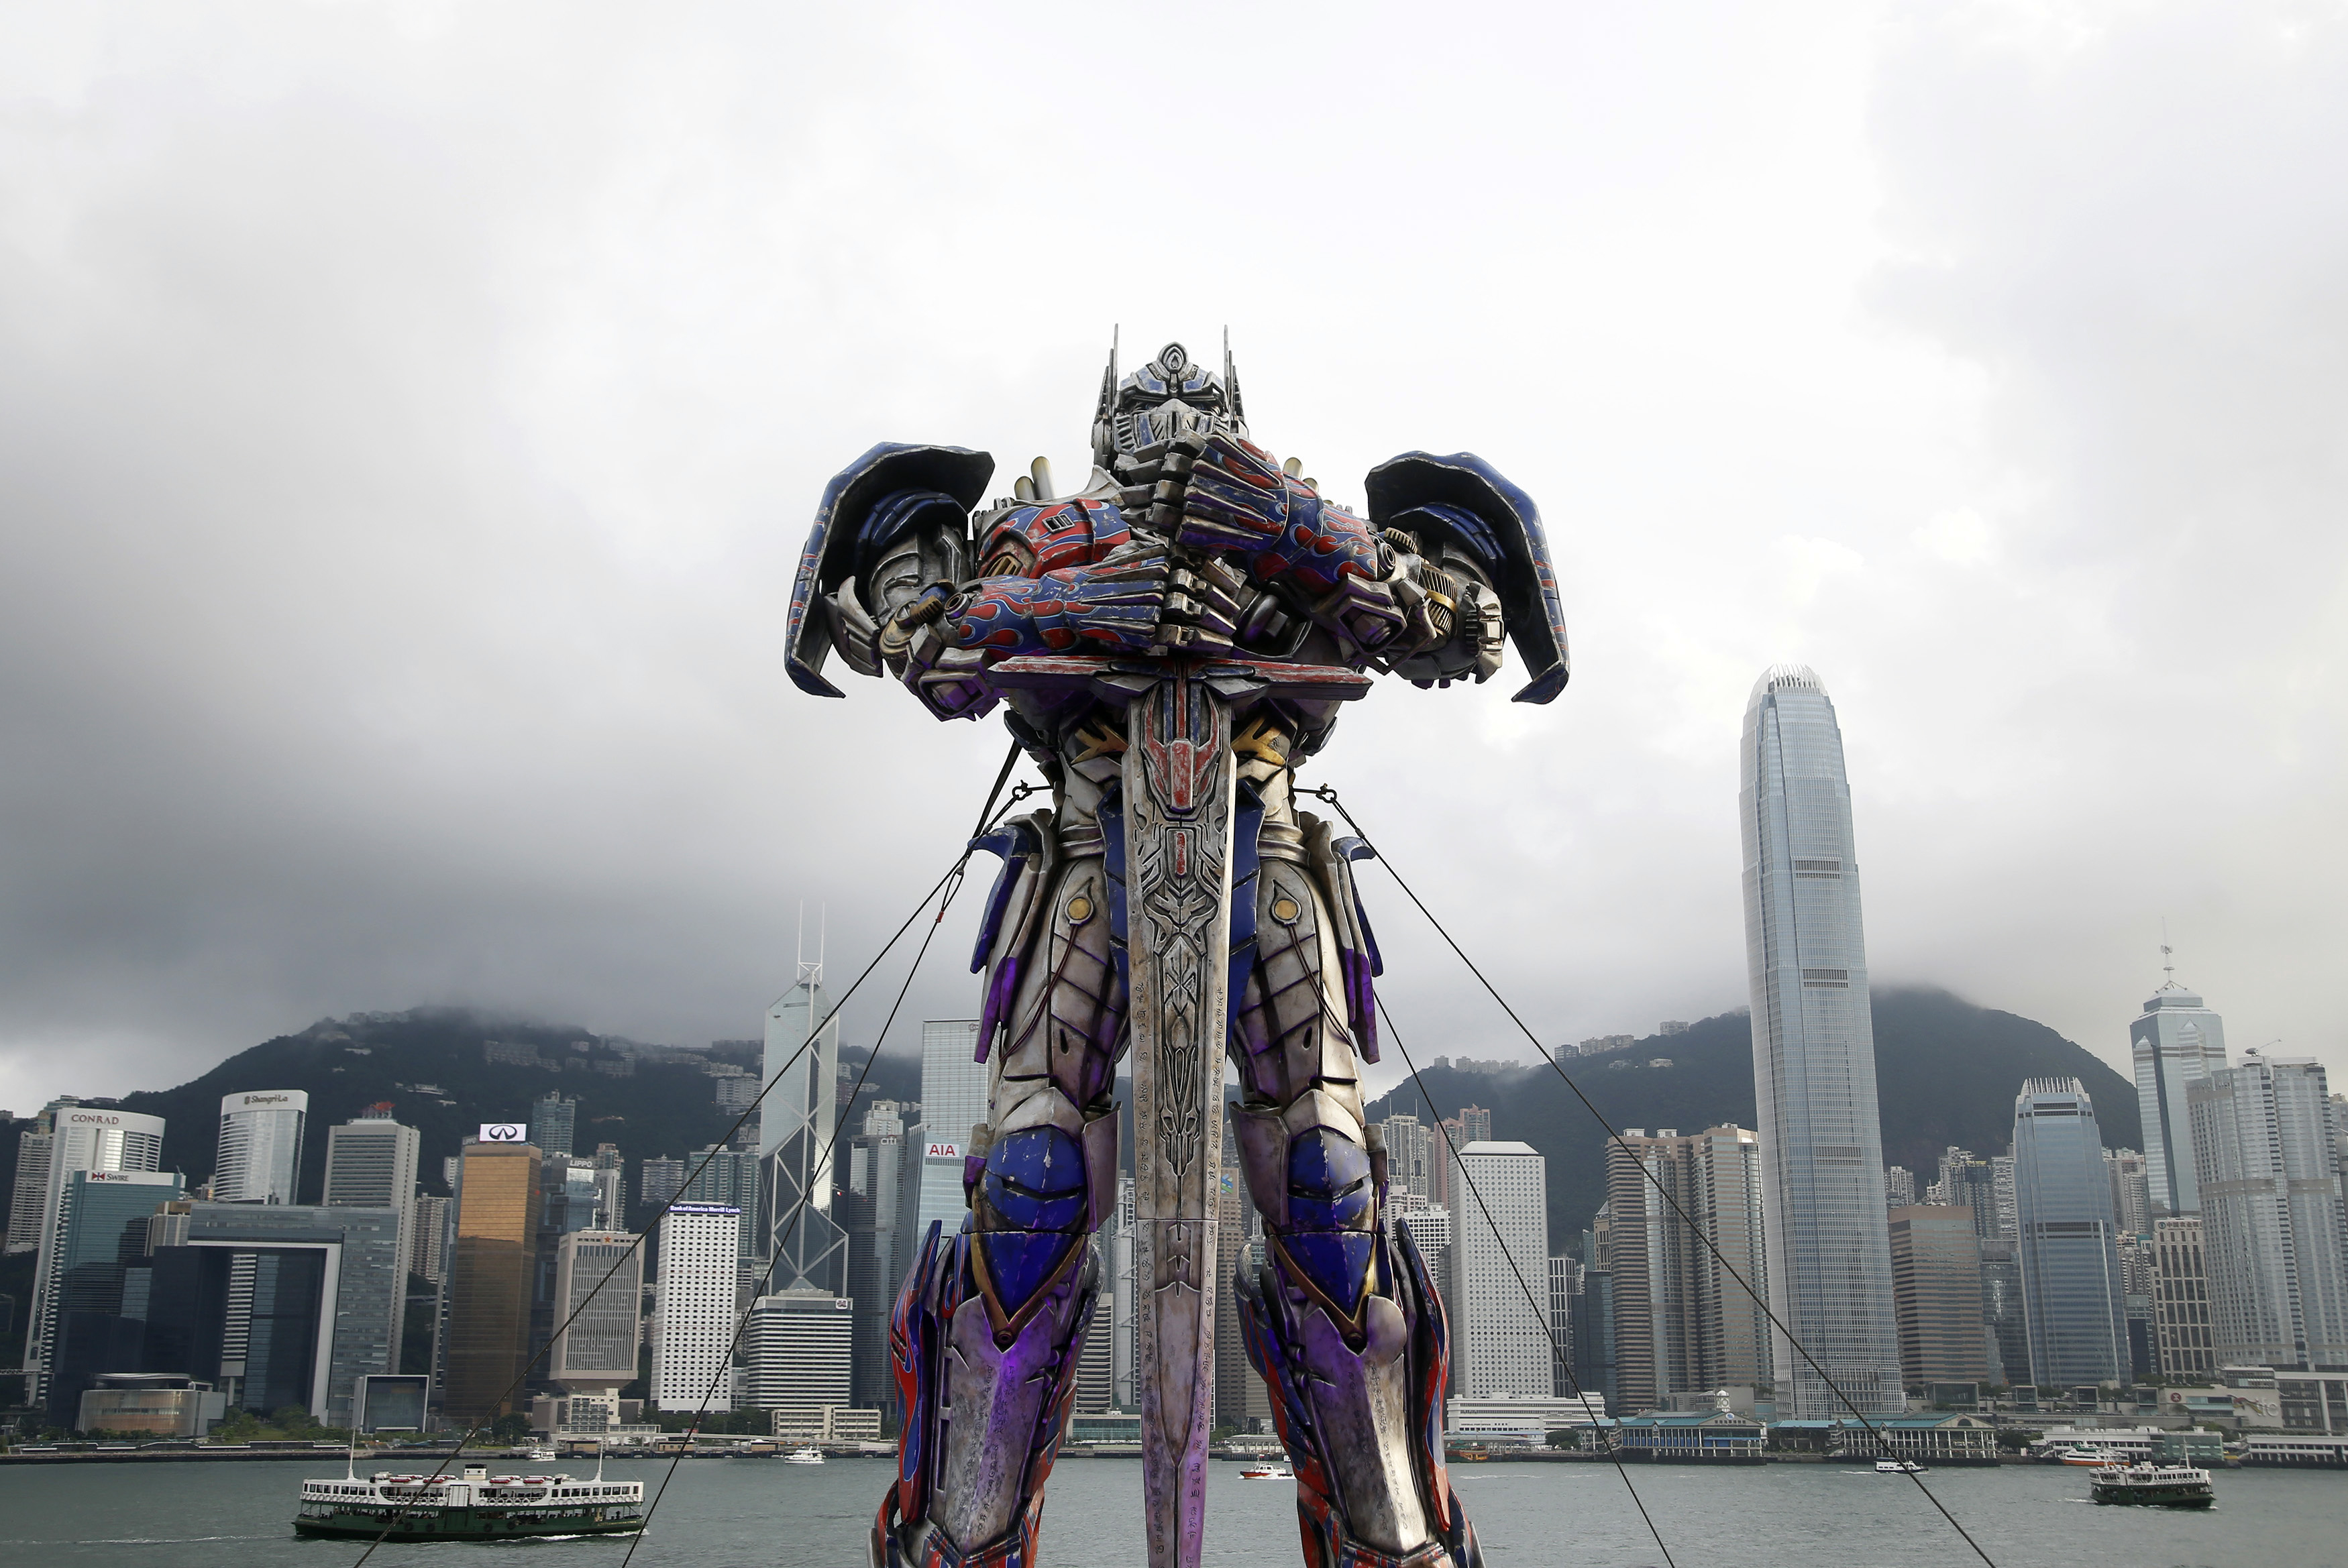 A 21-foot tall model of the Transformers character Optimus Prime is displayed on the red carpet before the world premiere of the film "Transformers: Age of Extinction" in Hong Kong